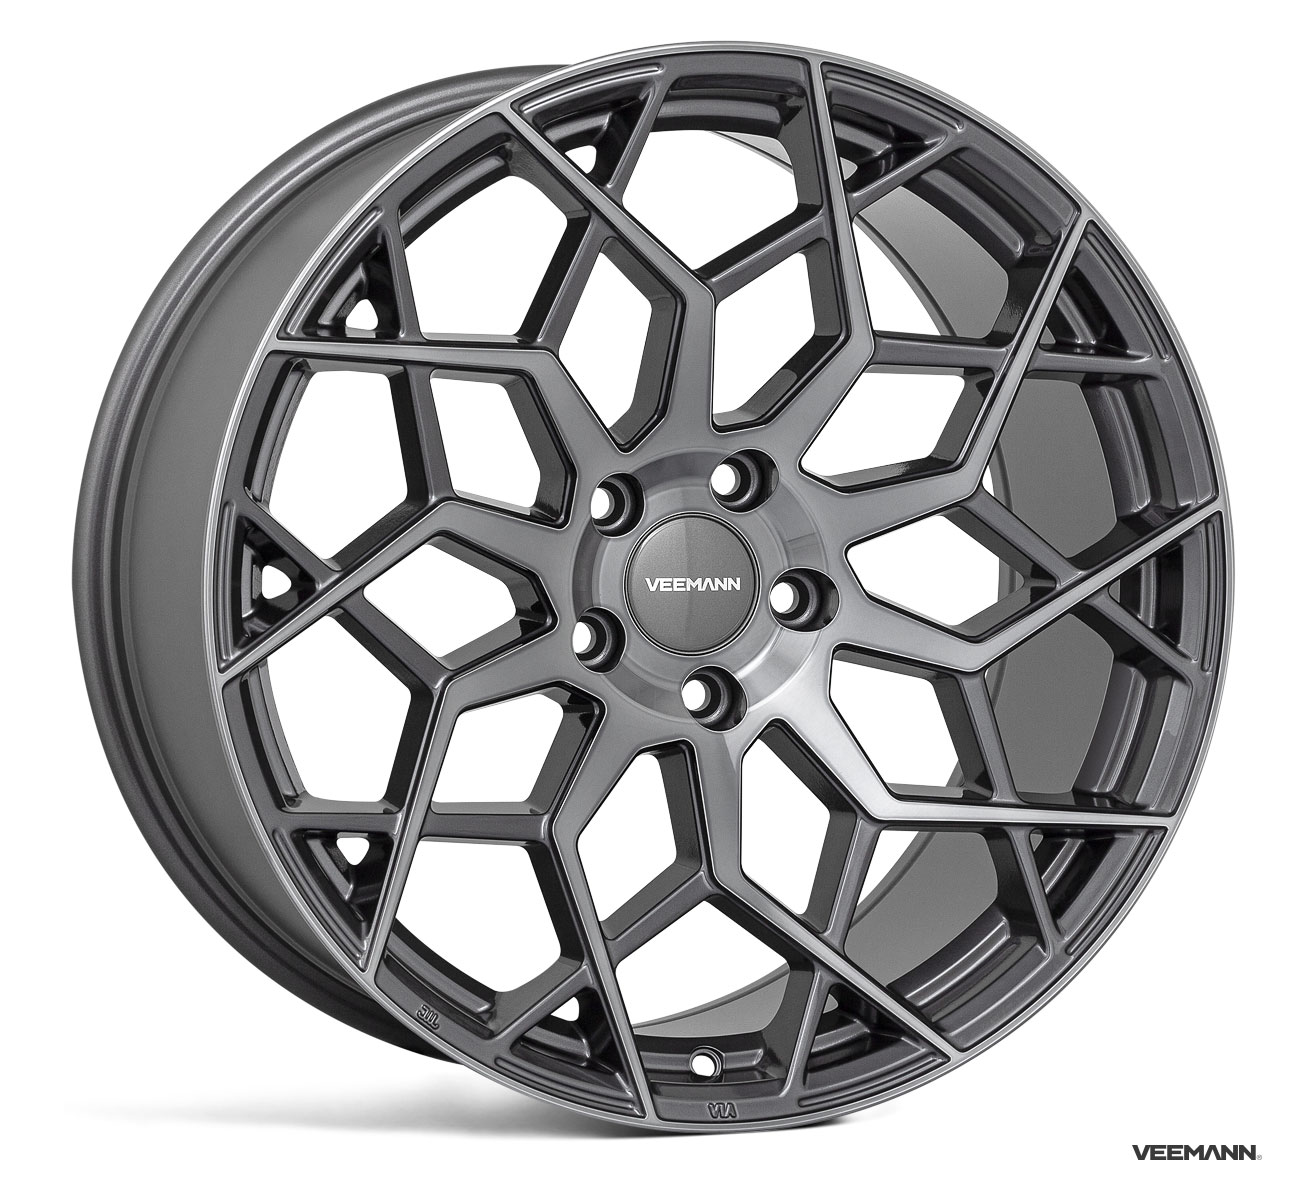 NEW 19" VEEMANN V-FS42 ALLOY WHEELS IN GRAPHITE SMOKE POL WITH WIDER 9.5" REARS